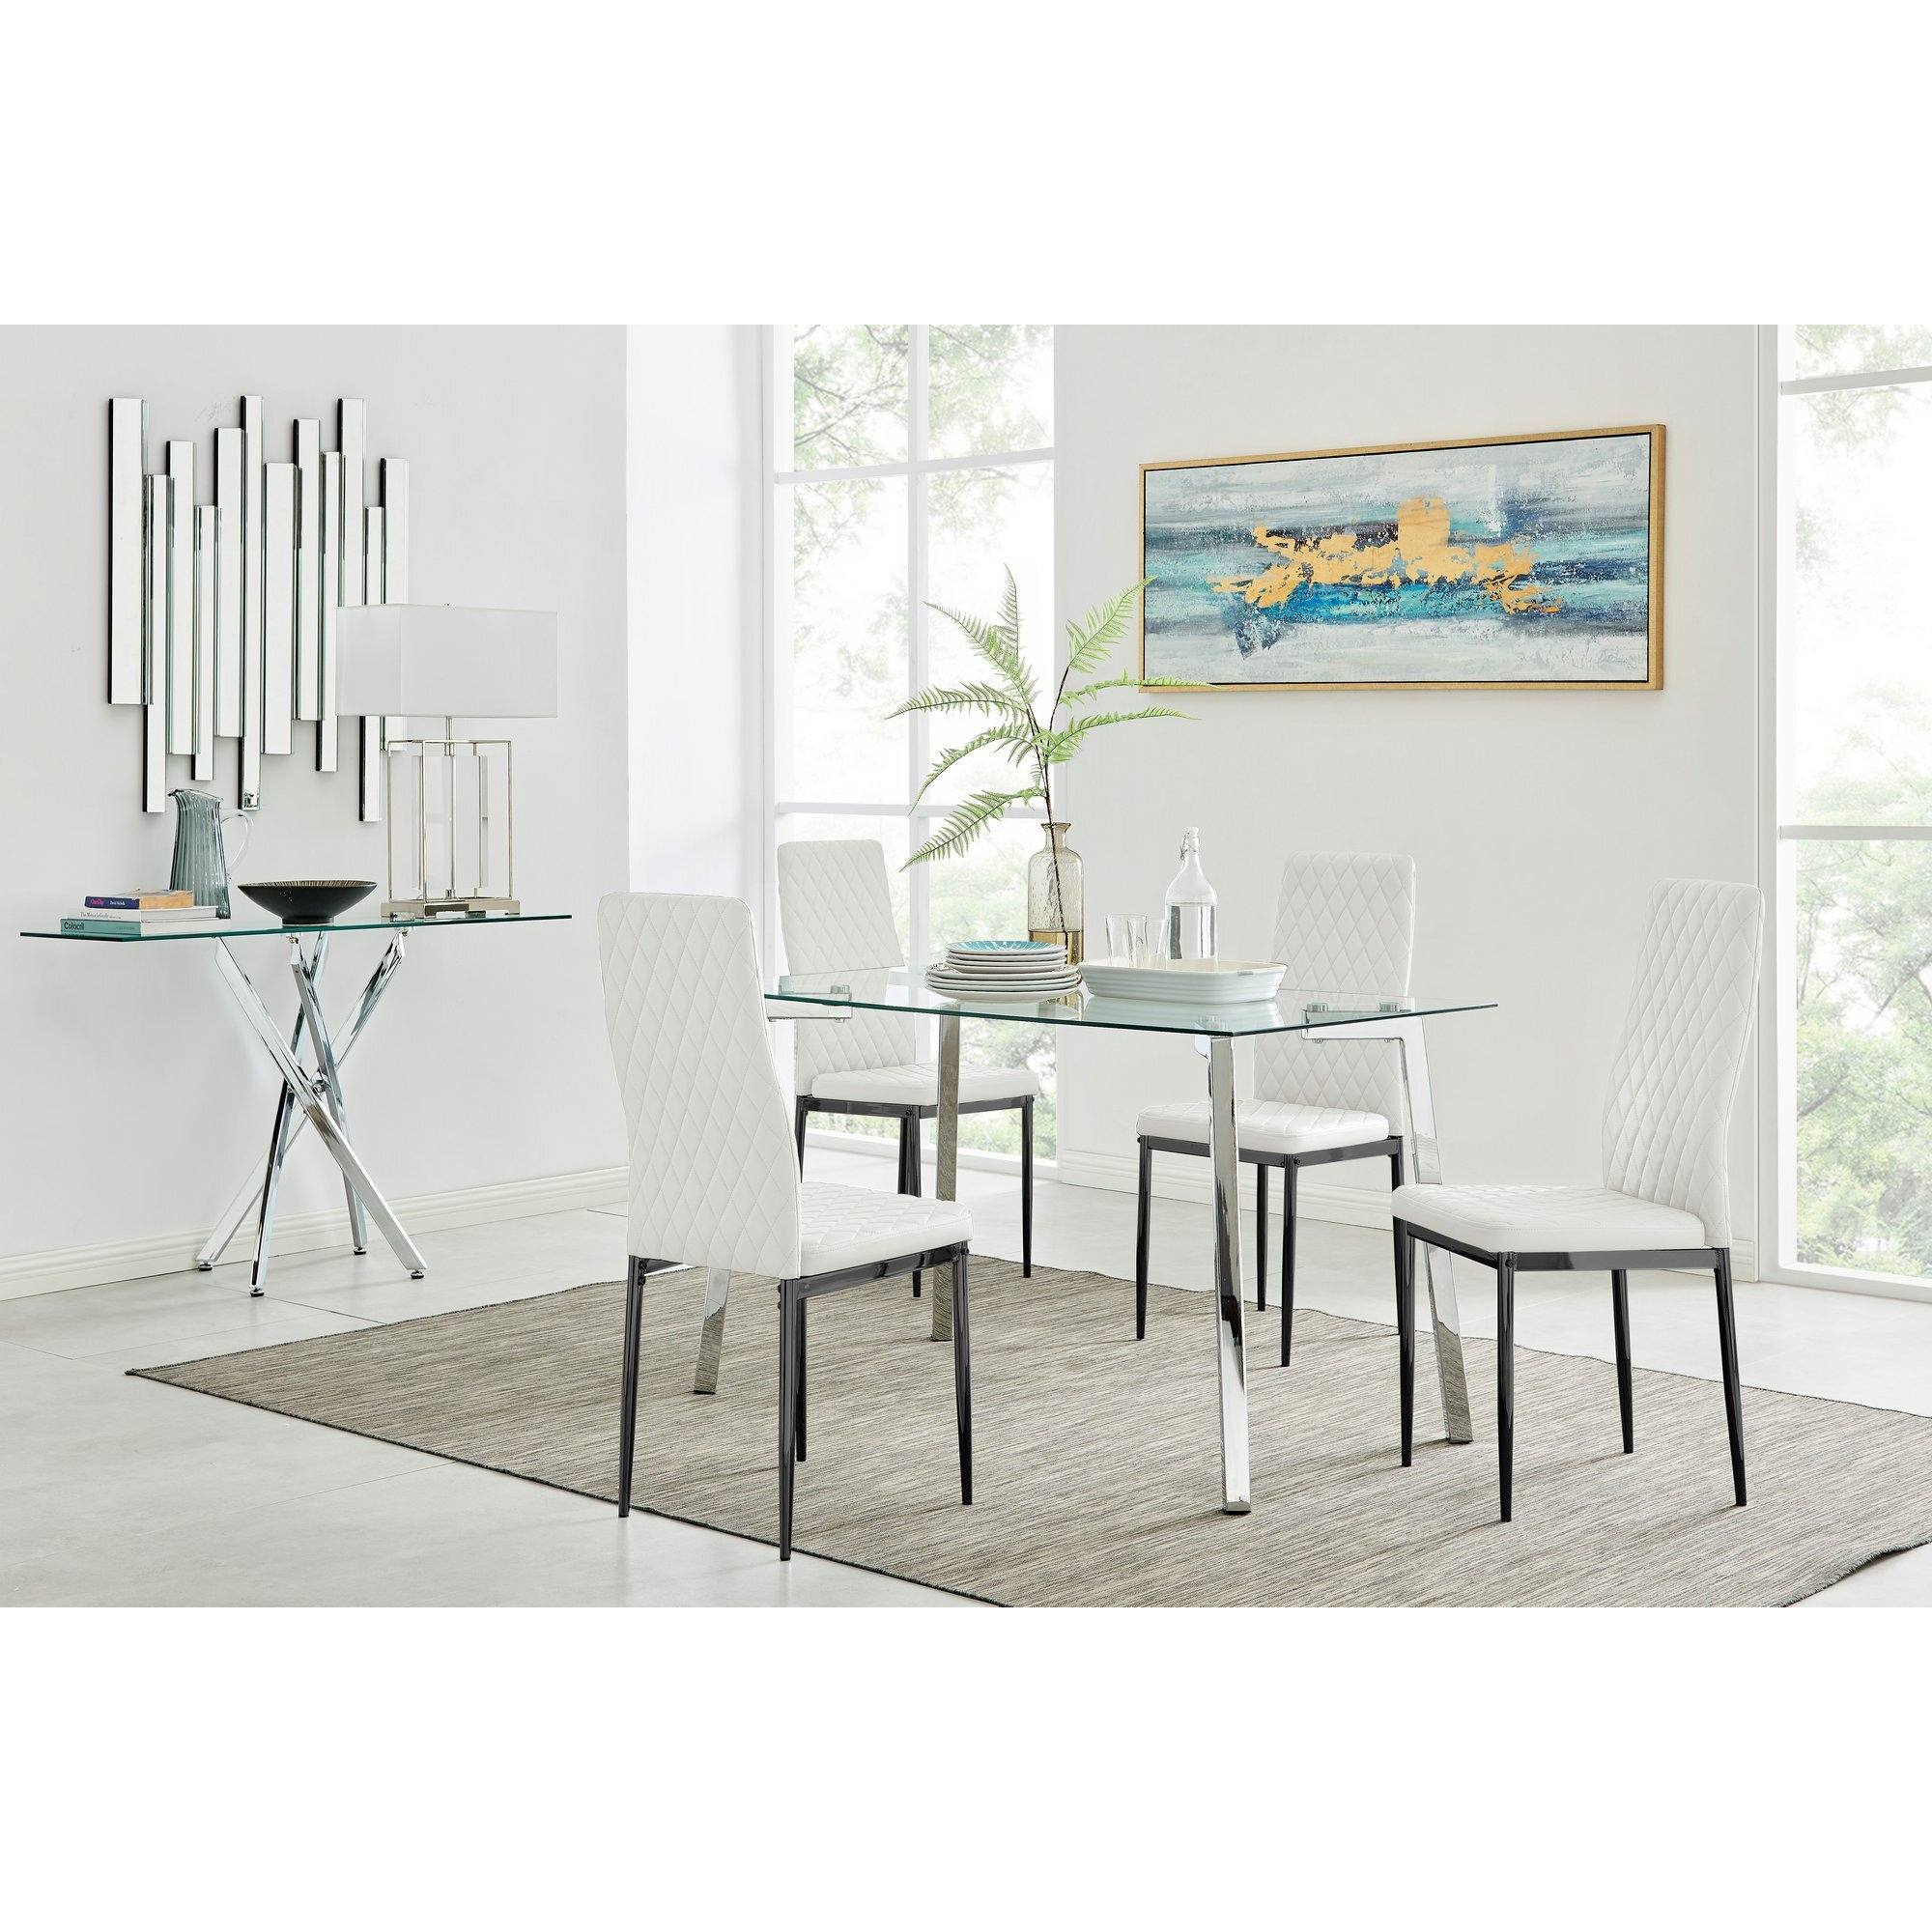 Cosmo Dining Table and 4 Milan Black Leg Chairs